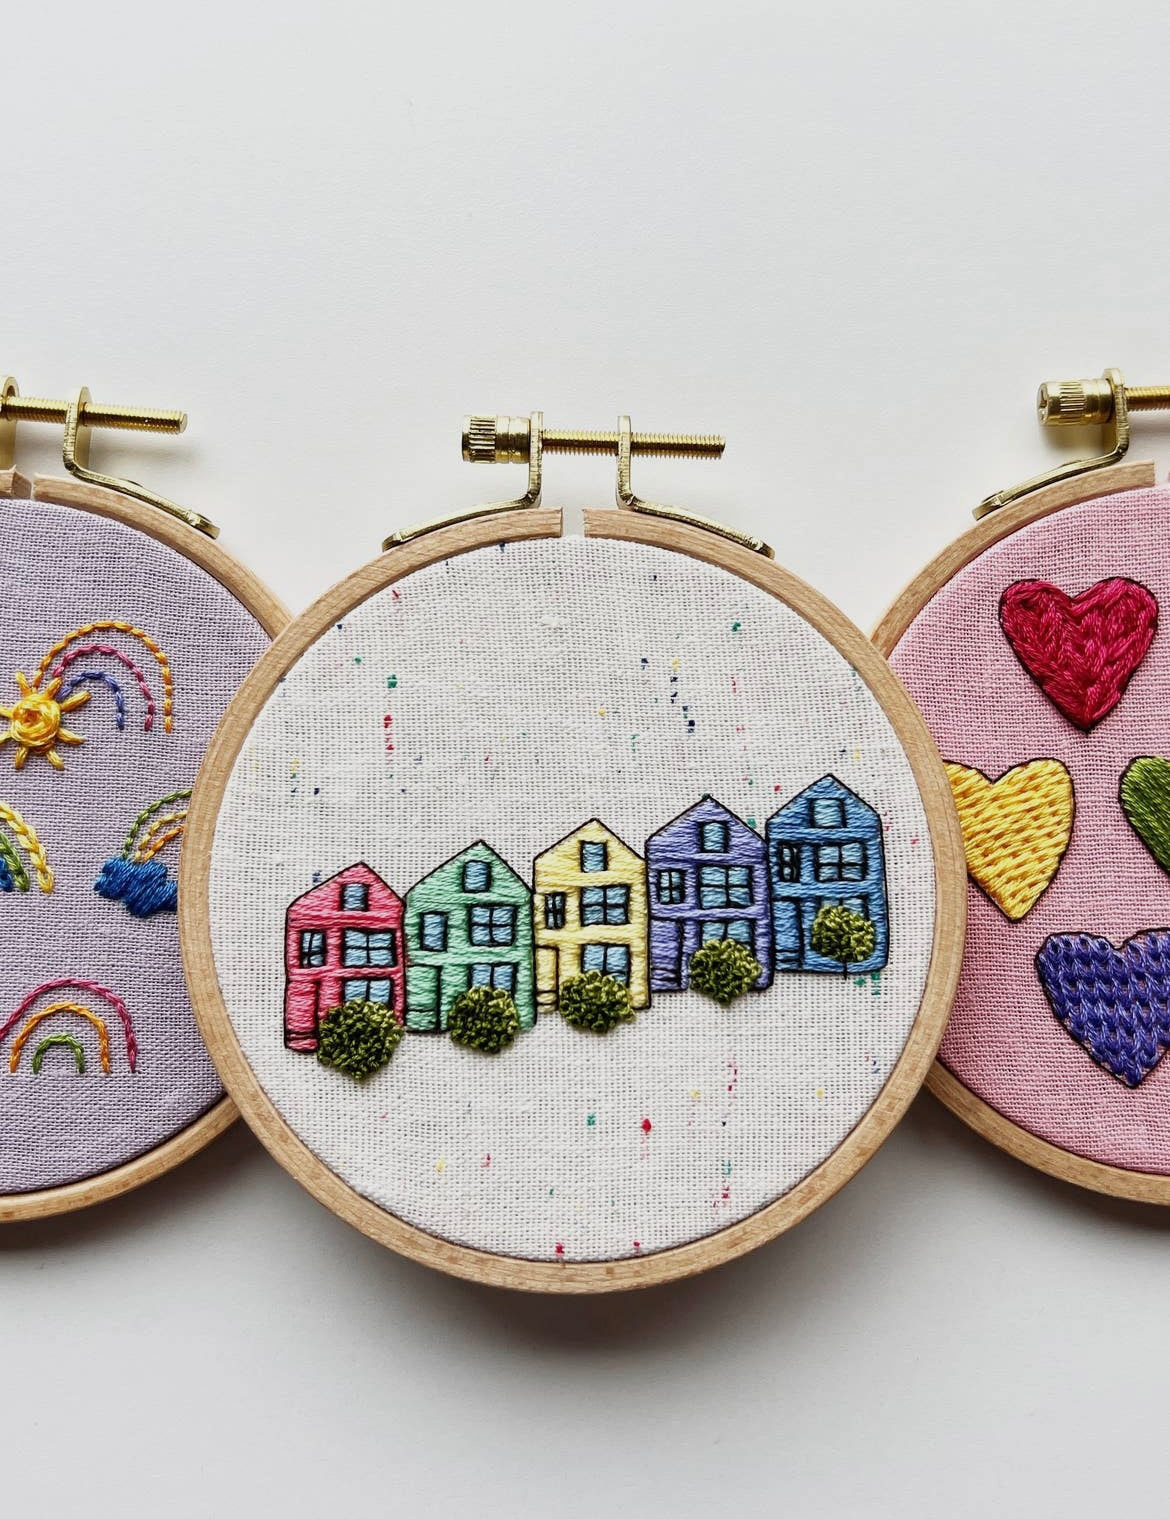 I Heart Stitching Hand Embroidery Kit For Beginners